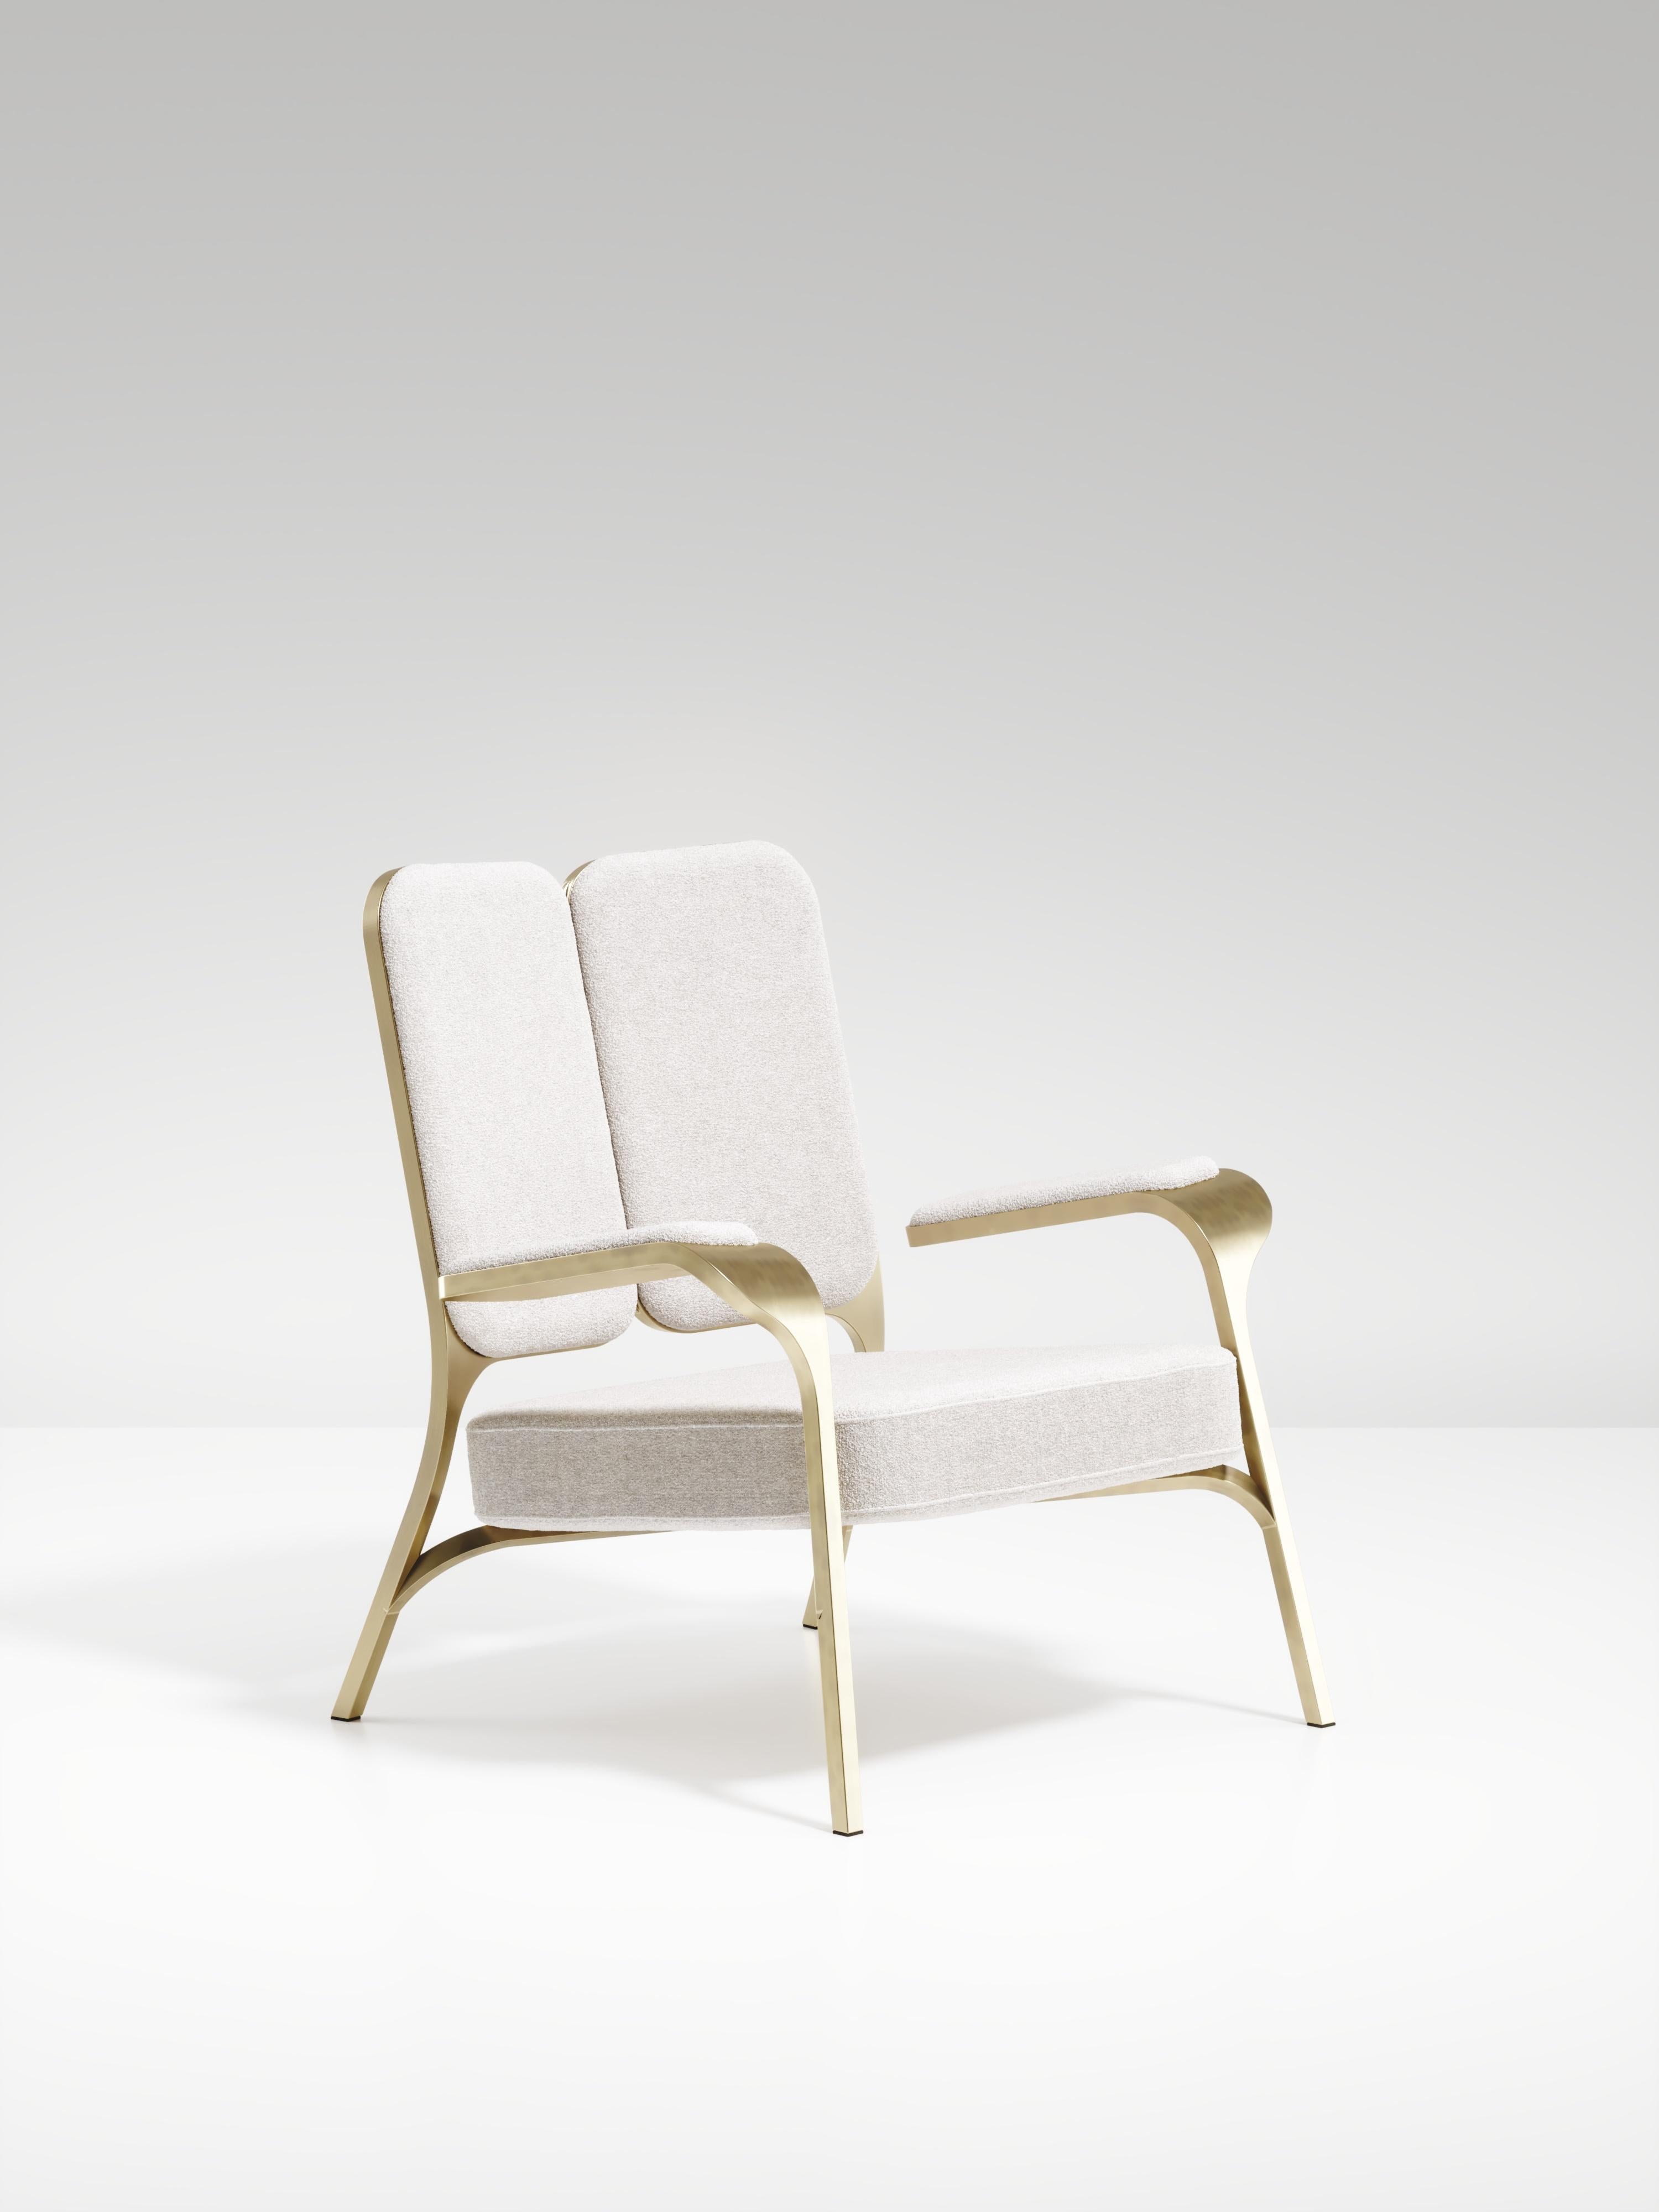 The Set of 2 Gingko armchairs by R & Y Augousti are elegant and whimsical pieces. The cream linen upholstered pieces provide comfort while exuding a playful aesthetic in its abstract nod to a butterfly with the form of its backrest and intricate